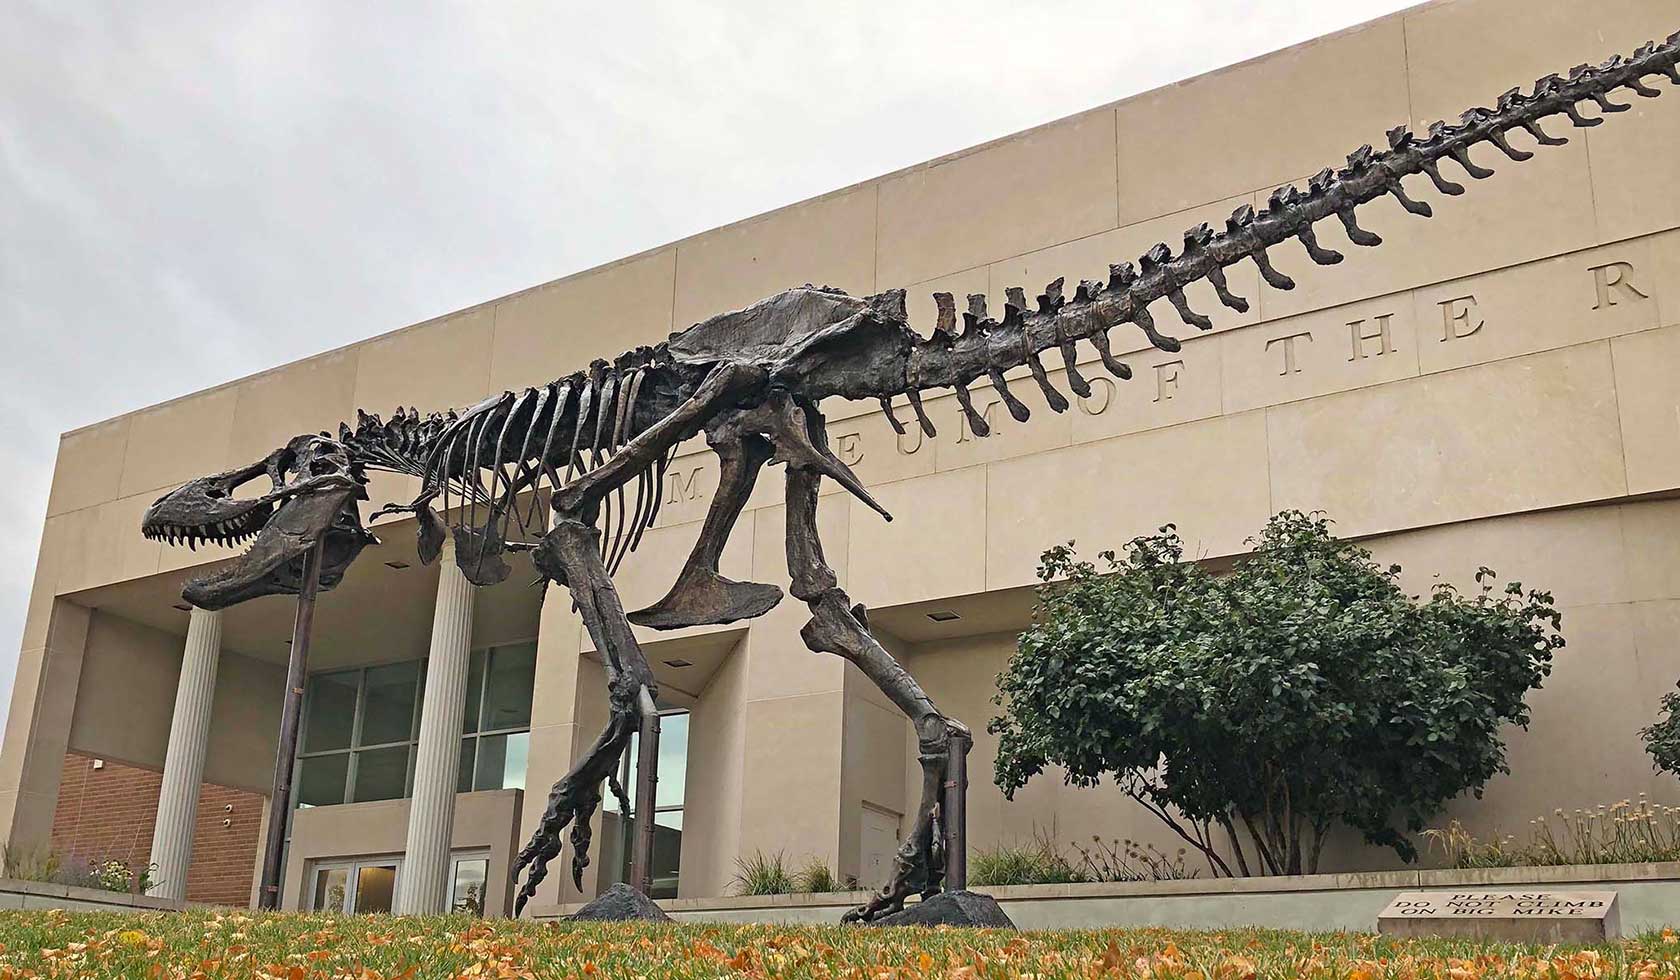 A large T. Rex skeleton cast stands in front of the Museum of the Rockies in Bozeman, MT